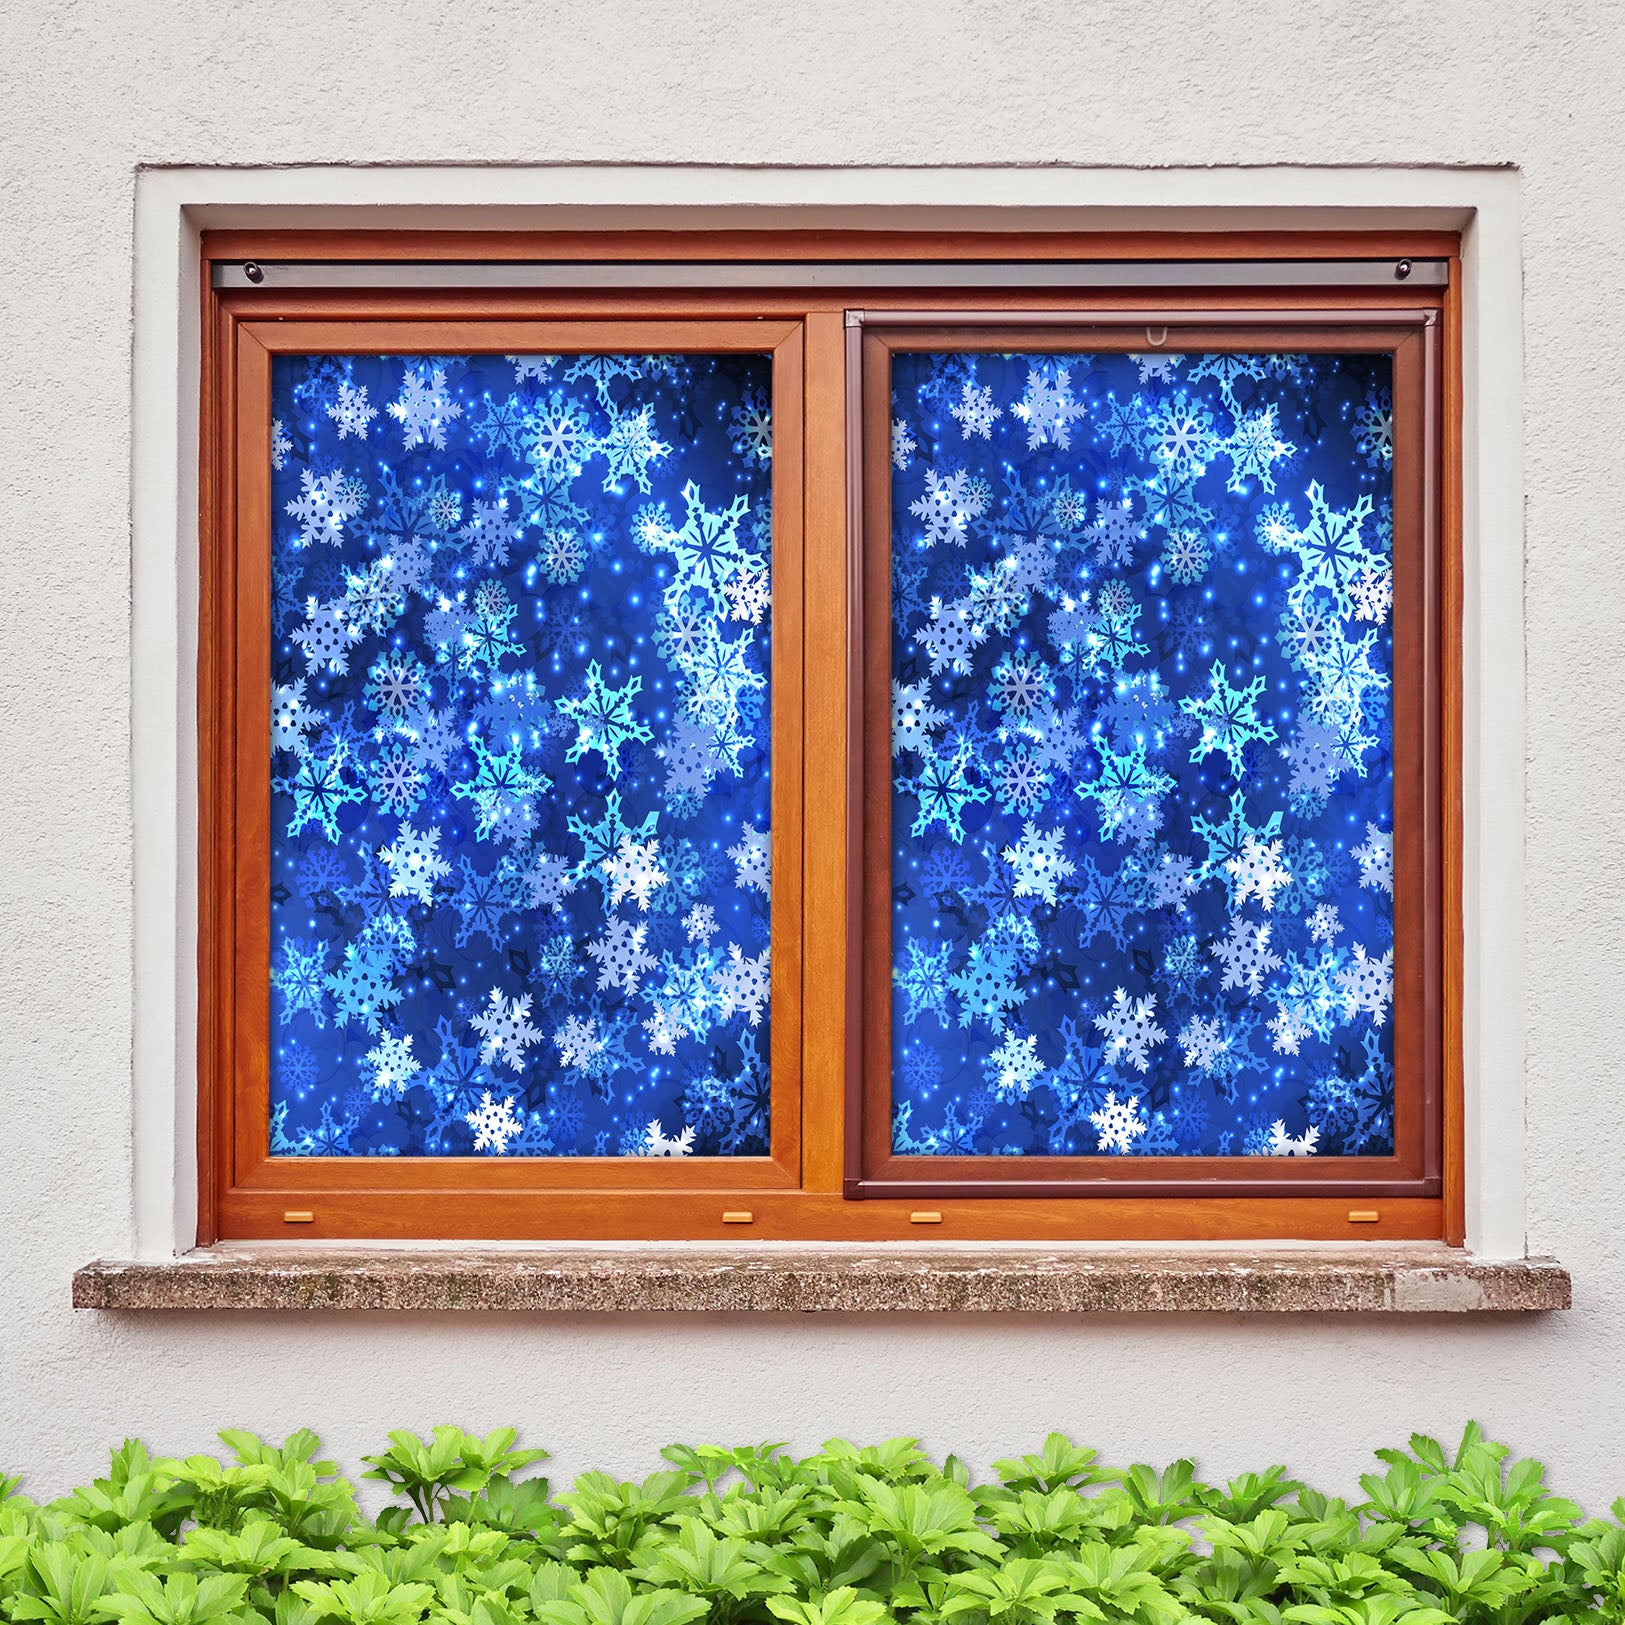 3D Snowflake 43112 Christmas Window Film Print Sticker Cling Stained Glass Xmas